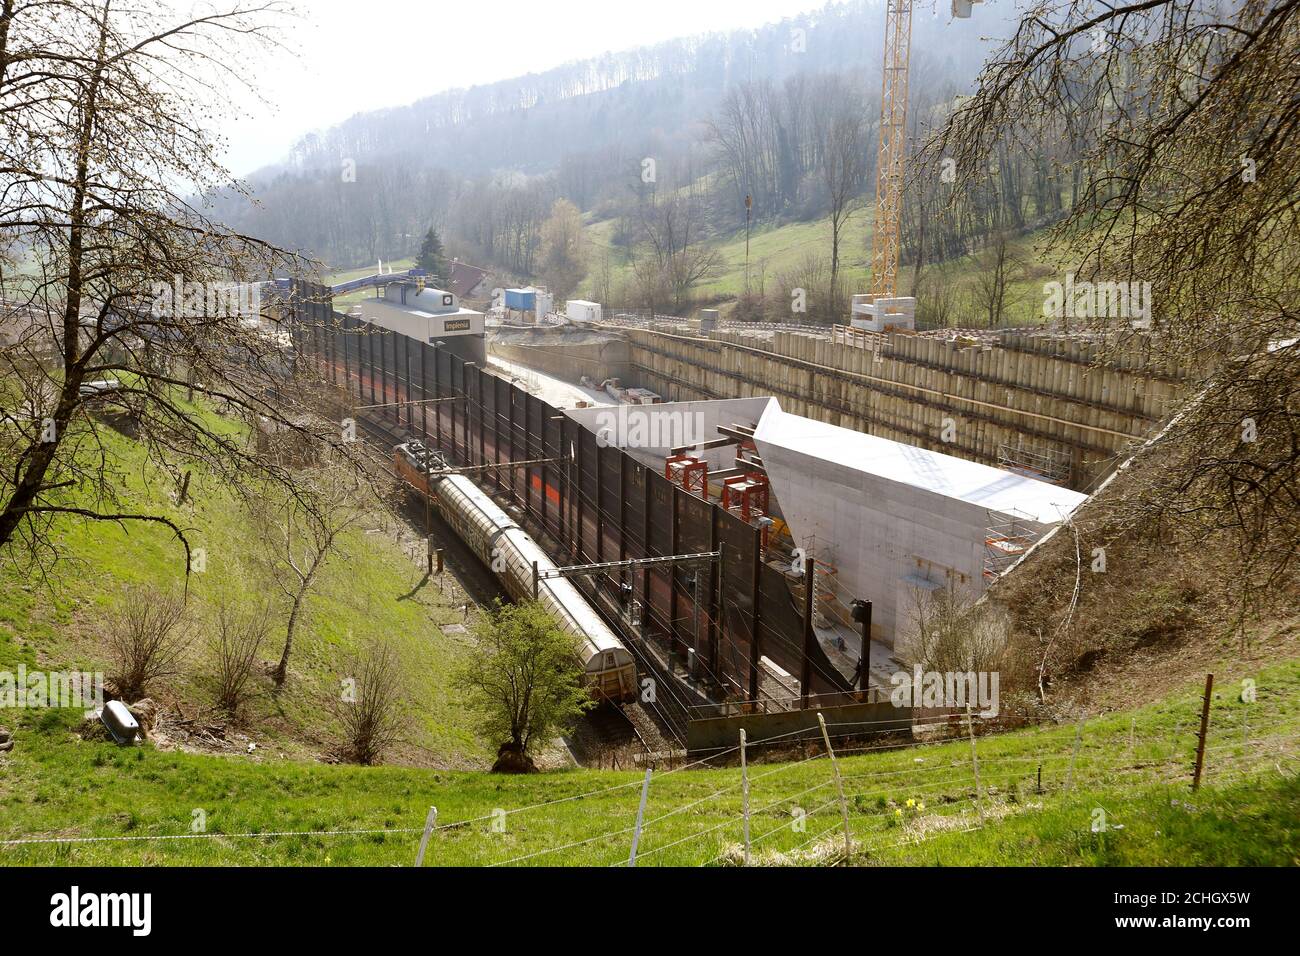 A train leaves the southern entrance of the existing Boezberg tunnel  passing the construction site of the new 2.7 kilometres/1.68 miles long dual -track railway tunnel near Schinznach Dorf, Switzerland April, 1, 2019.